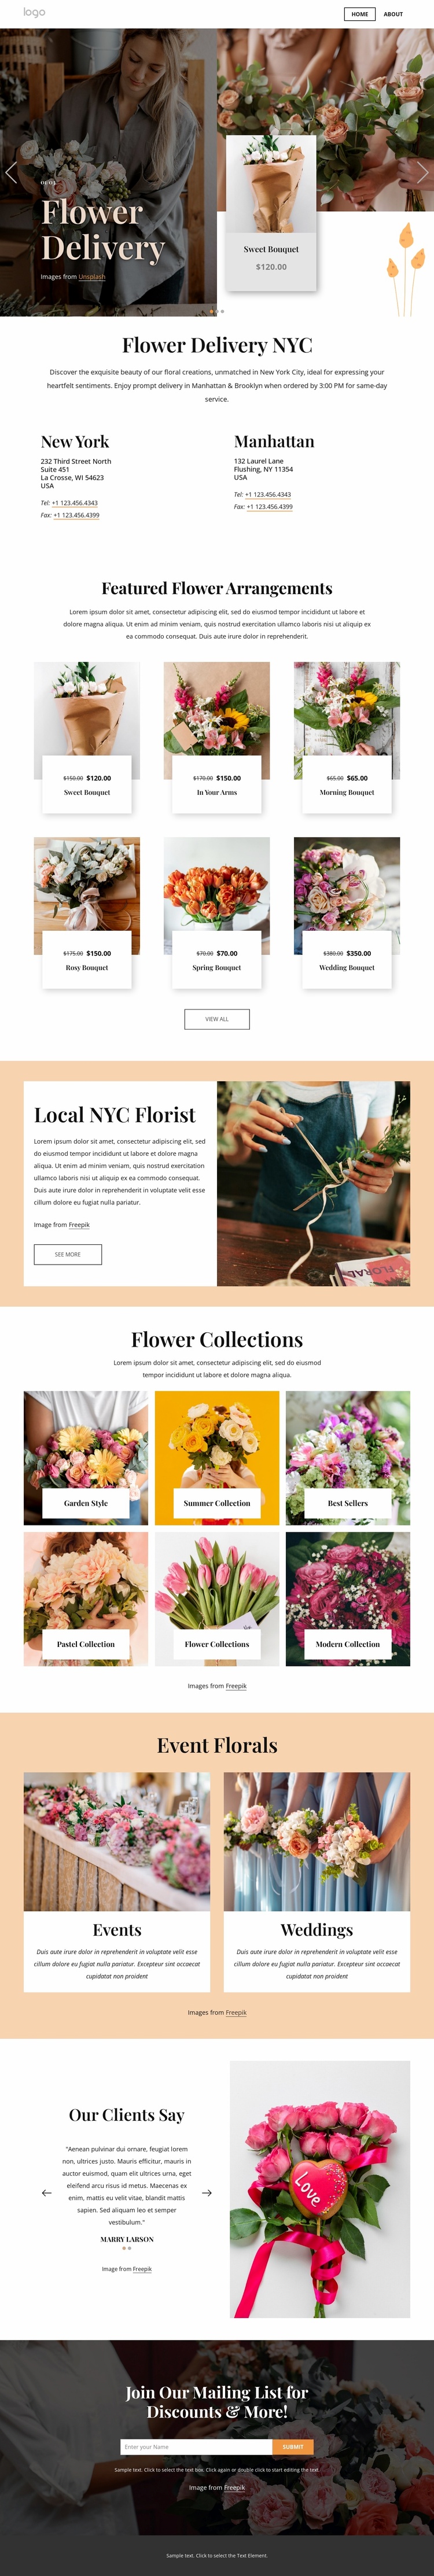 Flower delivery NYC Landing Page